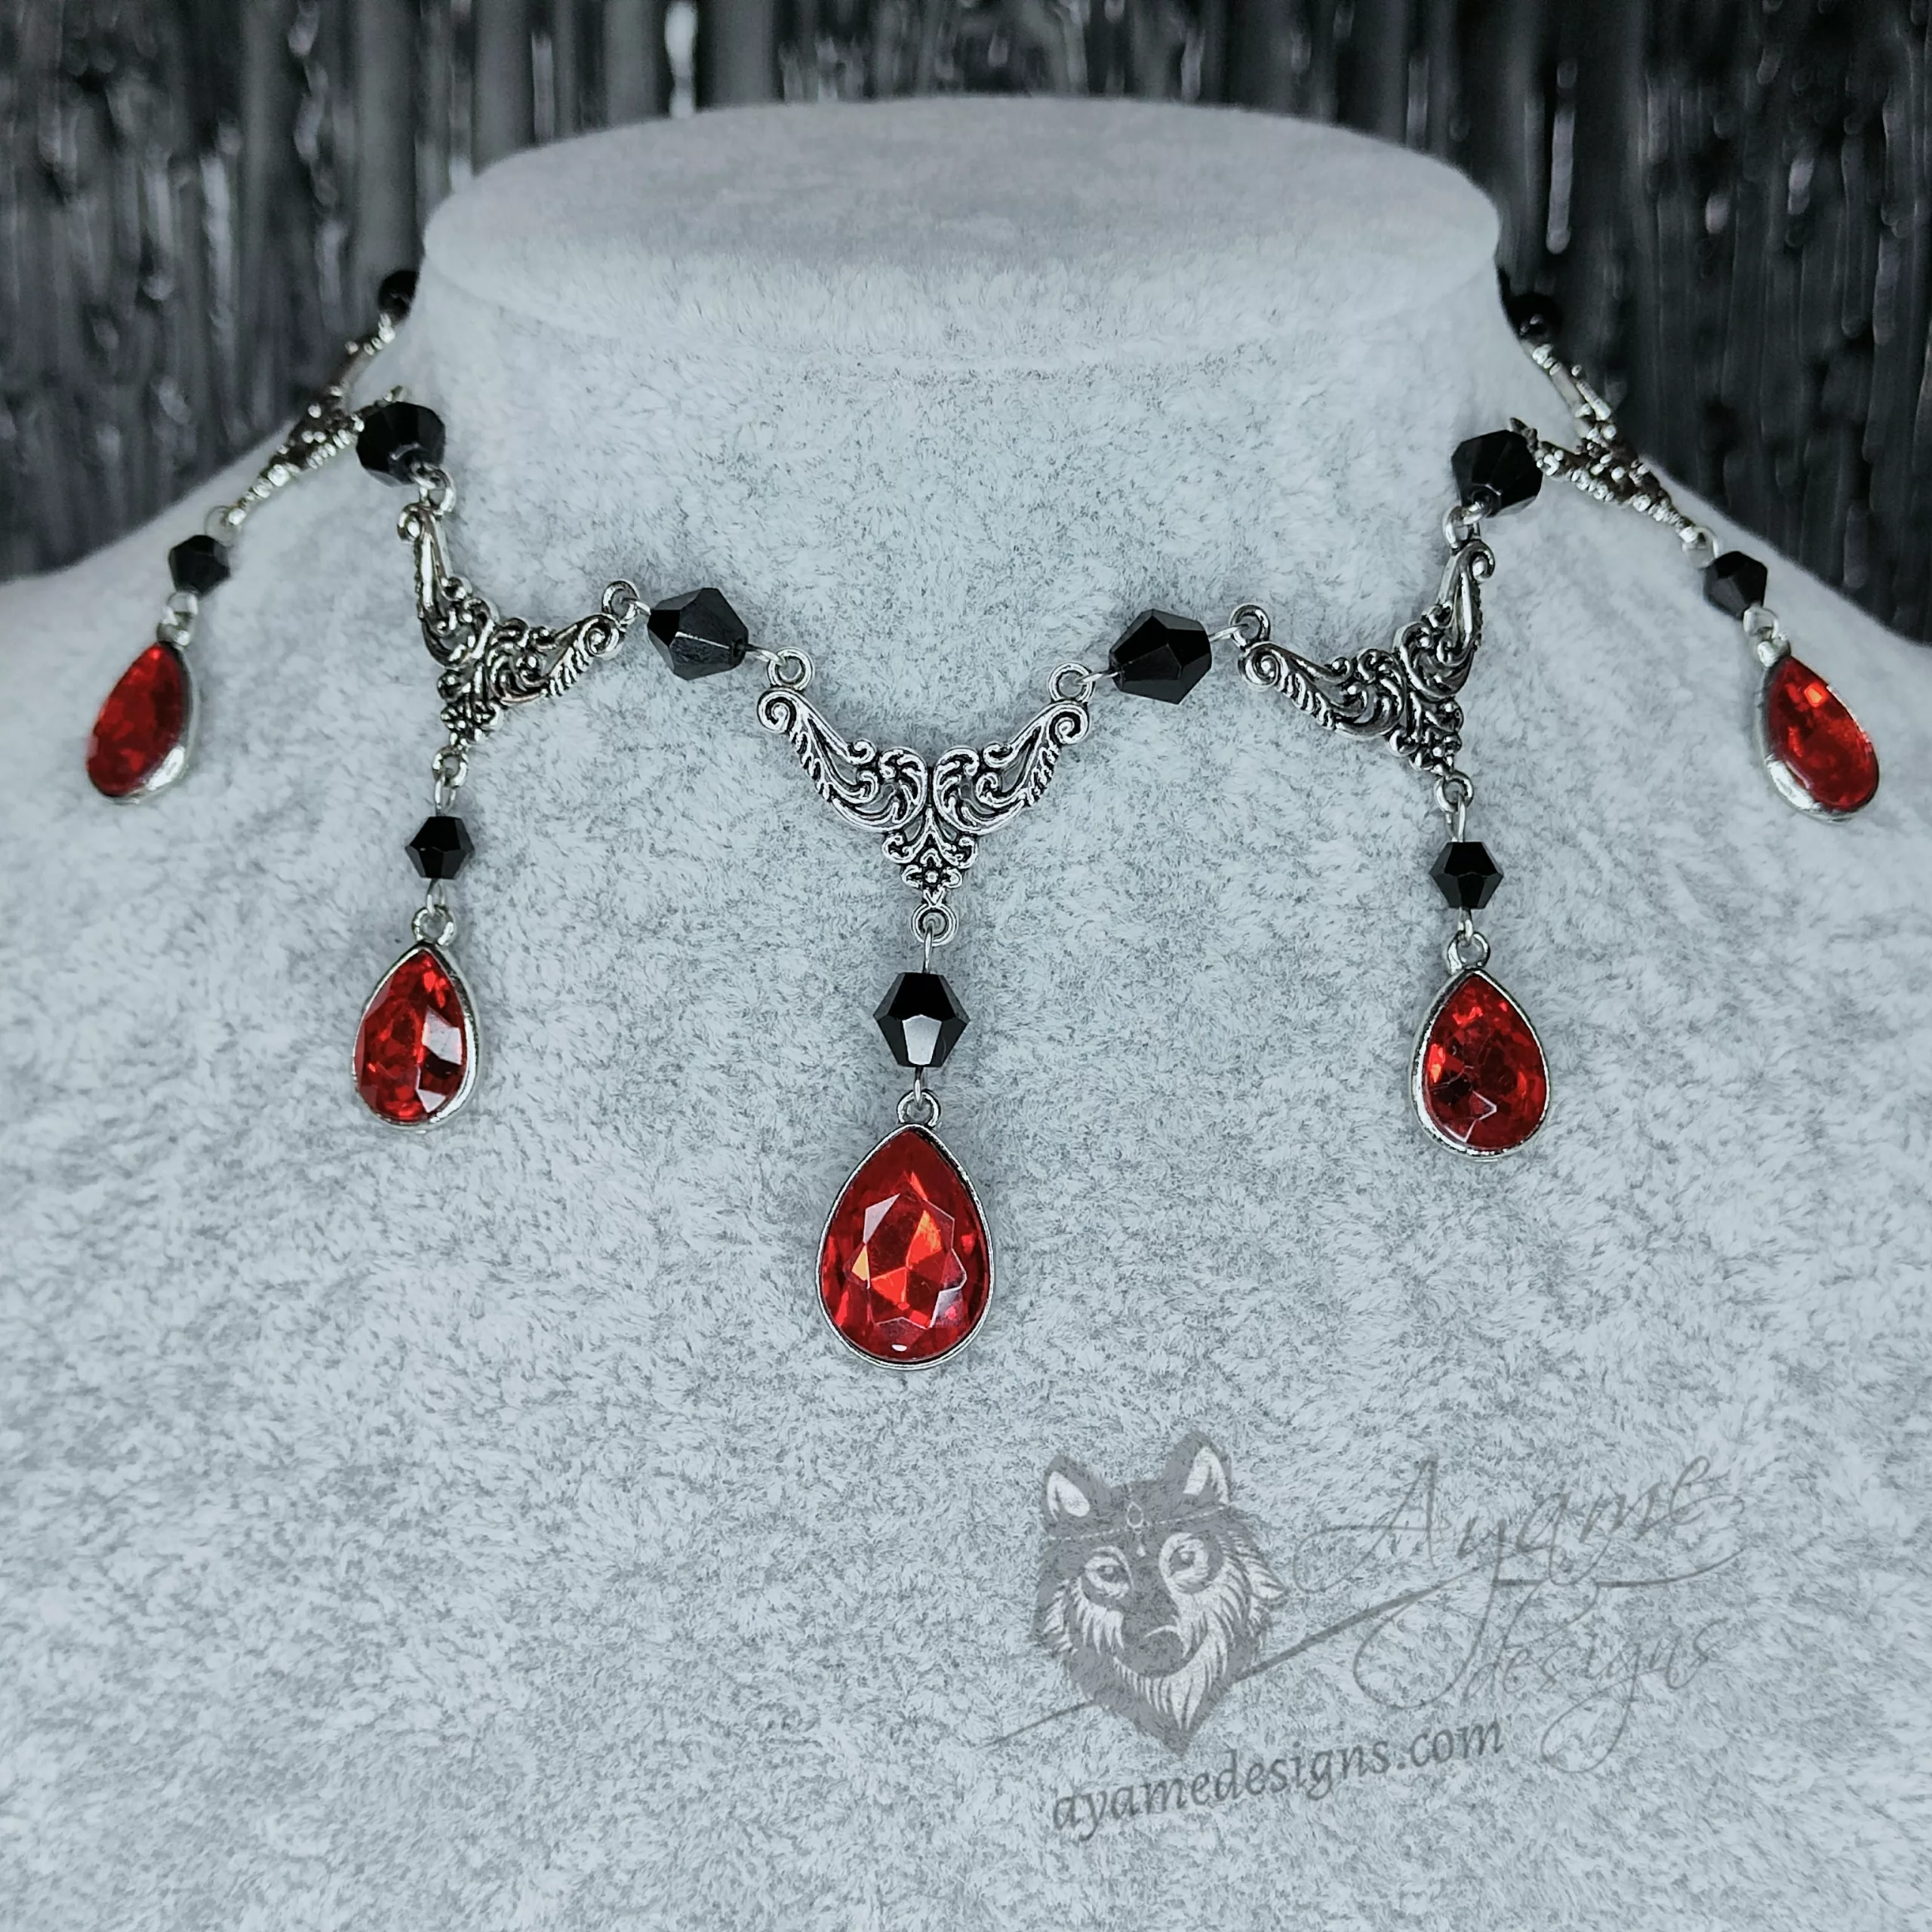 Victorian gothic choker necklace with filigree connectors, black Austrian crystal beads and red teardrop charms